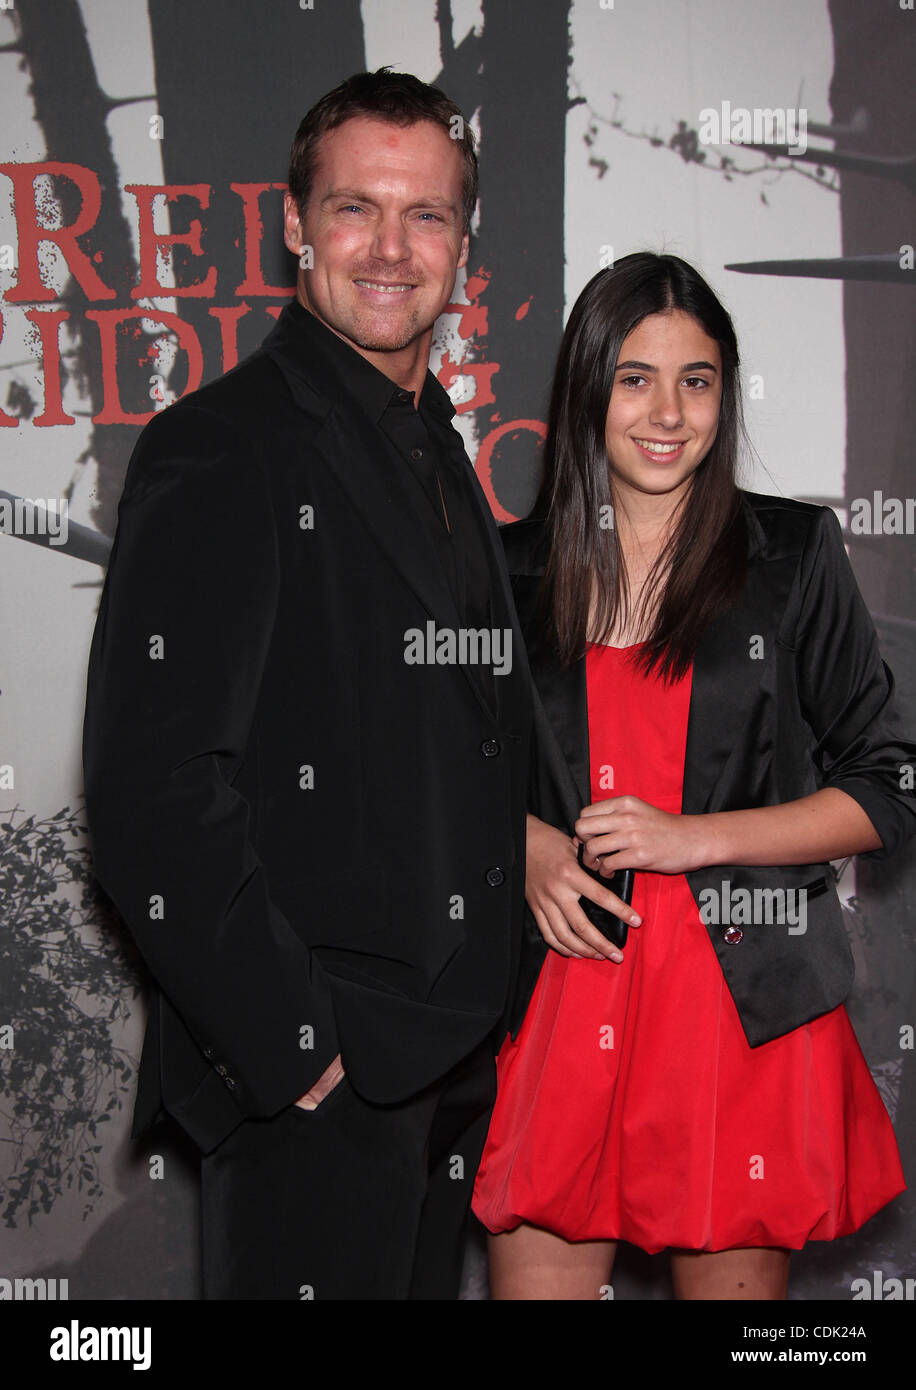 Mar. 7, 2011 - Hollywood, California, U.S. - MICHAEL SHANKS & DAUGHTER arrives for the premiere of the film 'Red Riding Hood' at the Chinese theater. (Credit Image: © Lisa O'Connor/ZUMAPRESS.com) Stock Photo